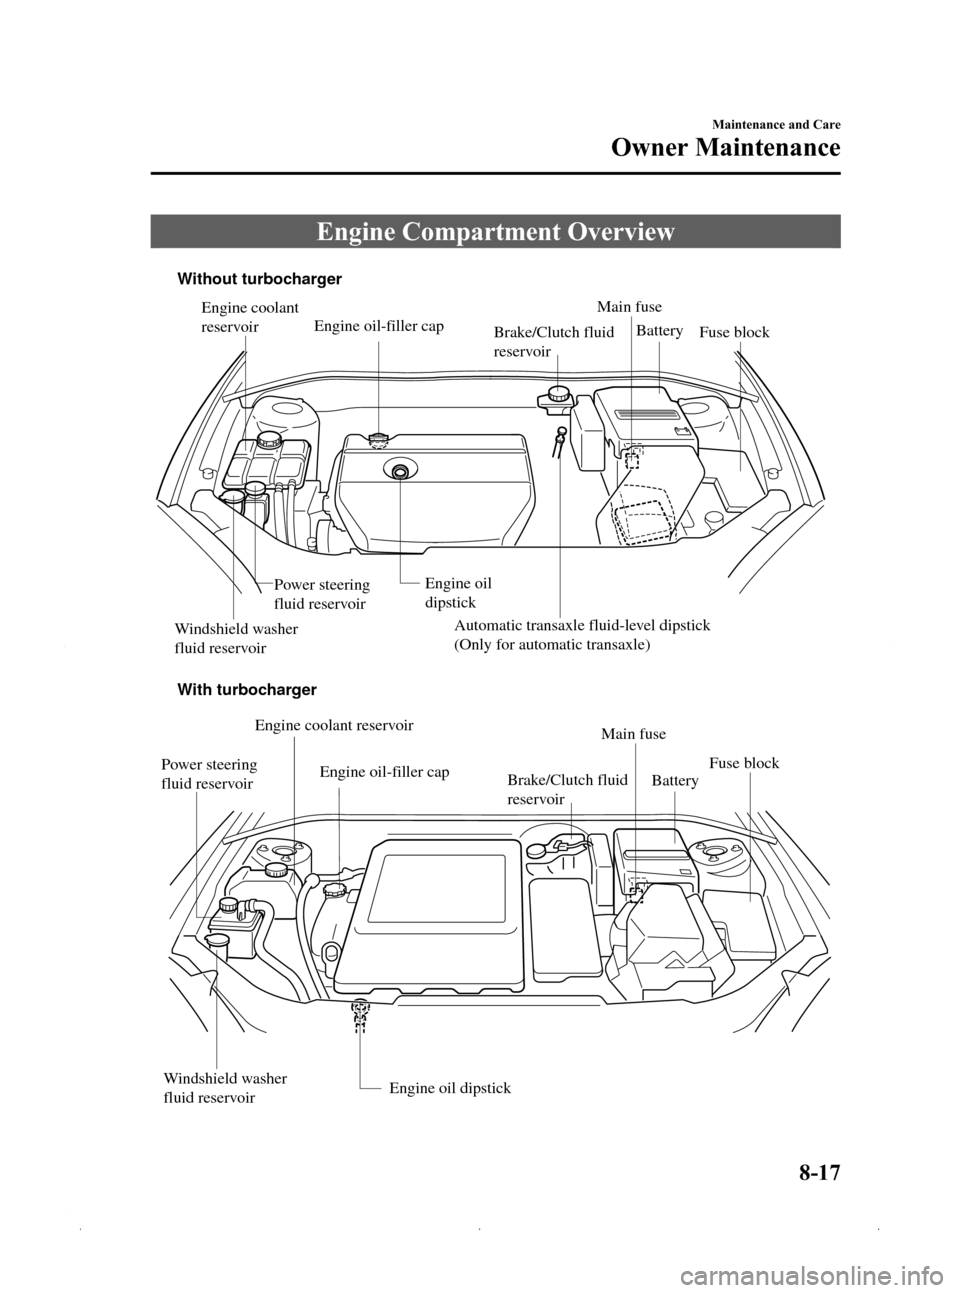 MAZDA MODEL 3 HATCHBACK 2009   (in English) User Guide Black plate (303,1)
Engine Compartment Overview
Main fuse
Automatic transaxle fluid-level dipstick 
(Only for automatic transaxle) Brake/Clutch fluid 
reservoir
Engine coolant 
reservoir
Engine oil 
d